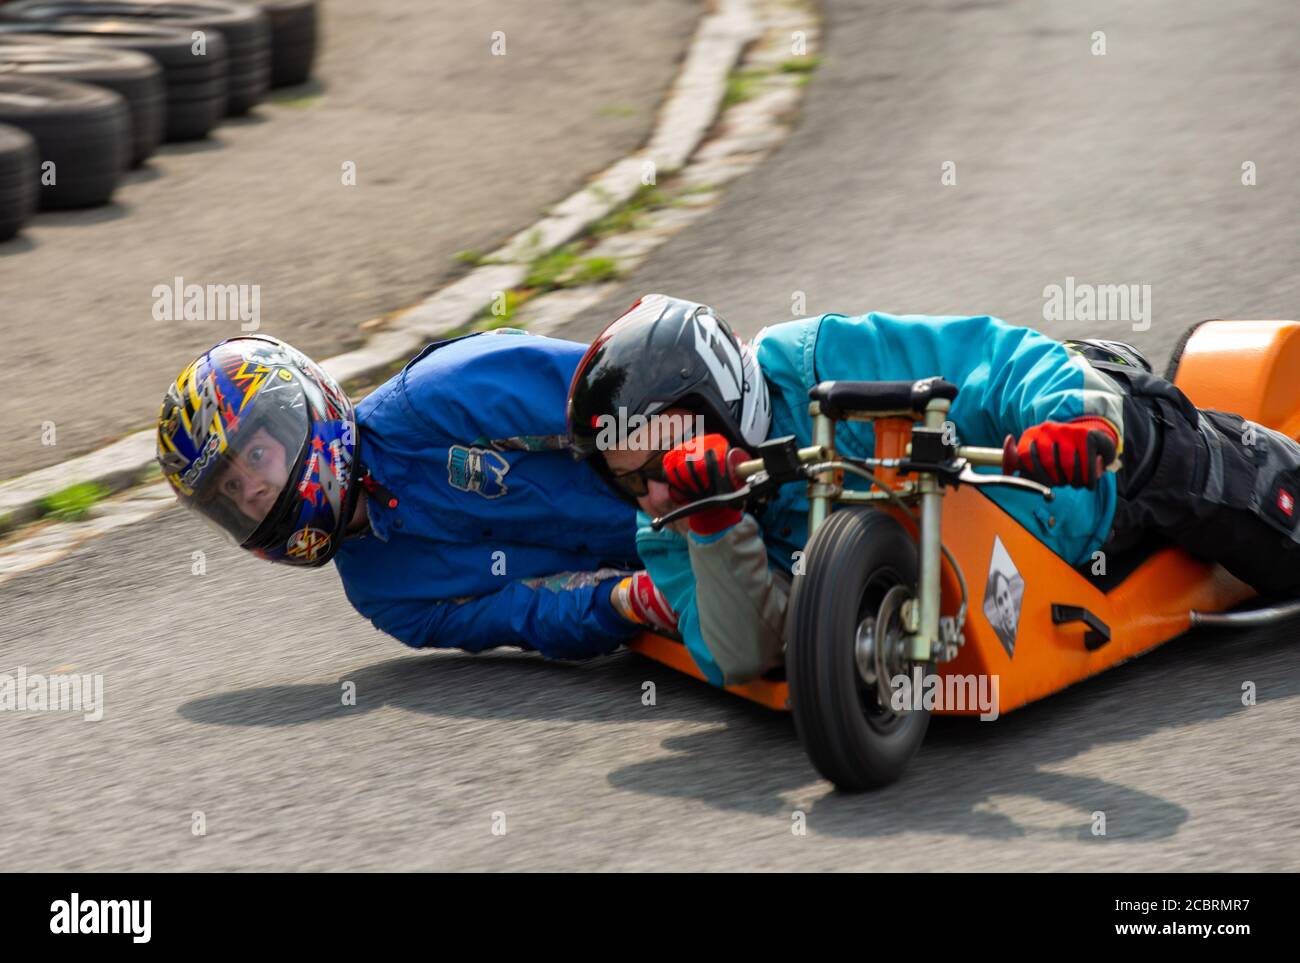 Freital, Germany. 15th Aug, 2020. 11th German Soapbox Racing Championships in Freital, Saxony. Marvin Köhler, soapbox name: Sidecar EVO II, Gornau (Saxony), Germany. A good 80 drivers take part in the race in the rolling soapboxes. Credit: Daniel Schäfer/dpa-Zentralbild/dpa/Alamy Live News Stock Photo